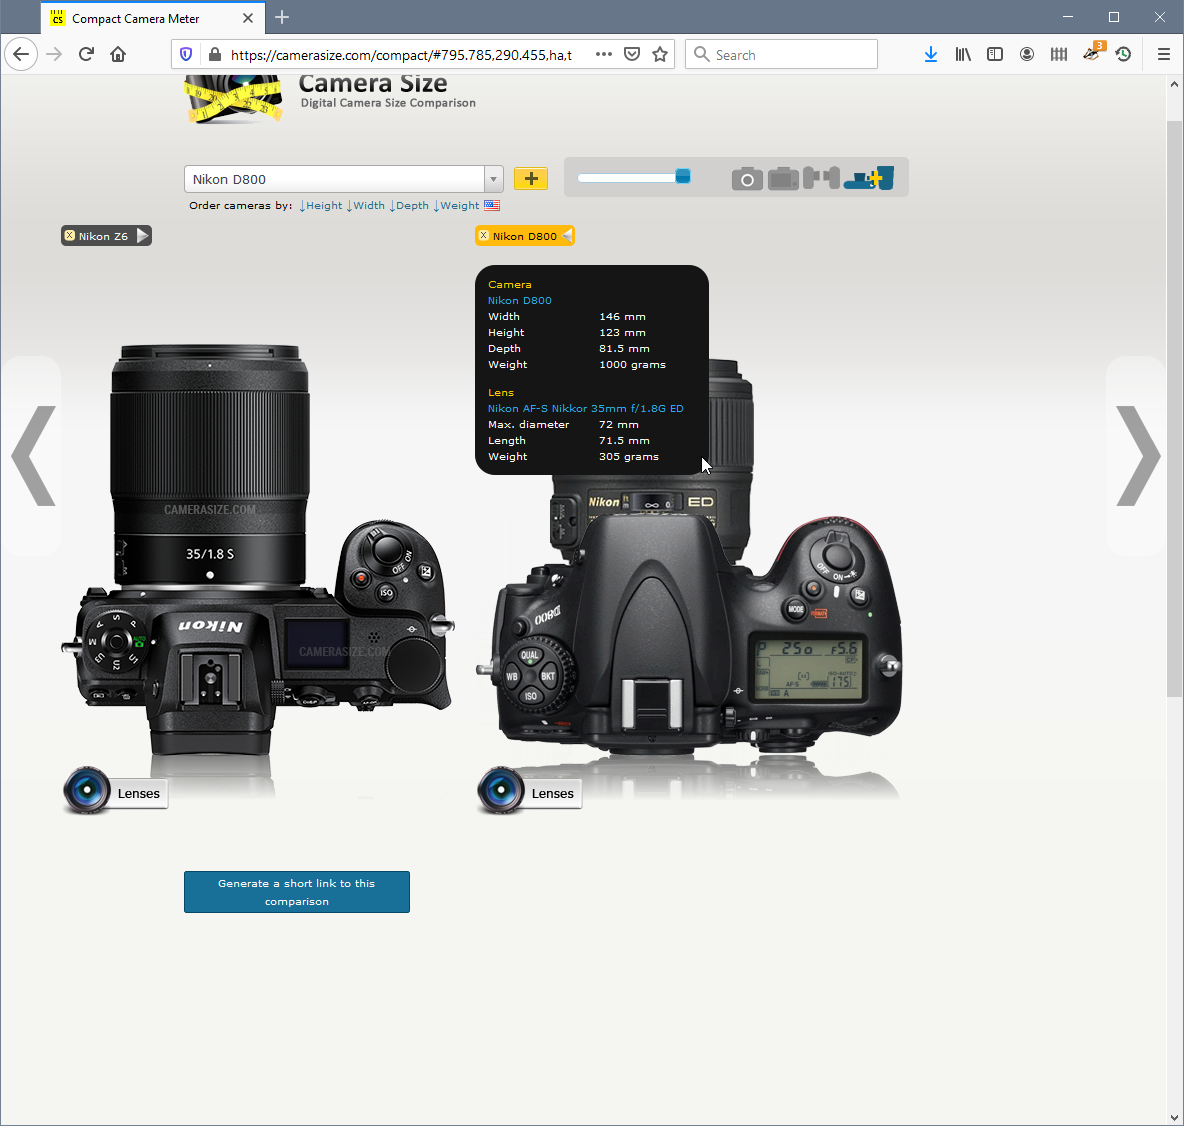 Compact-Camera-Meter-Mozilla-Firefox-2020-04-27-14-00-36.png